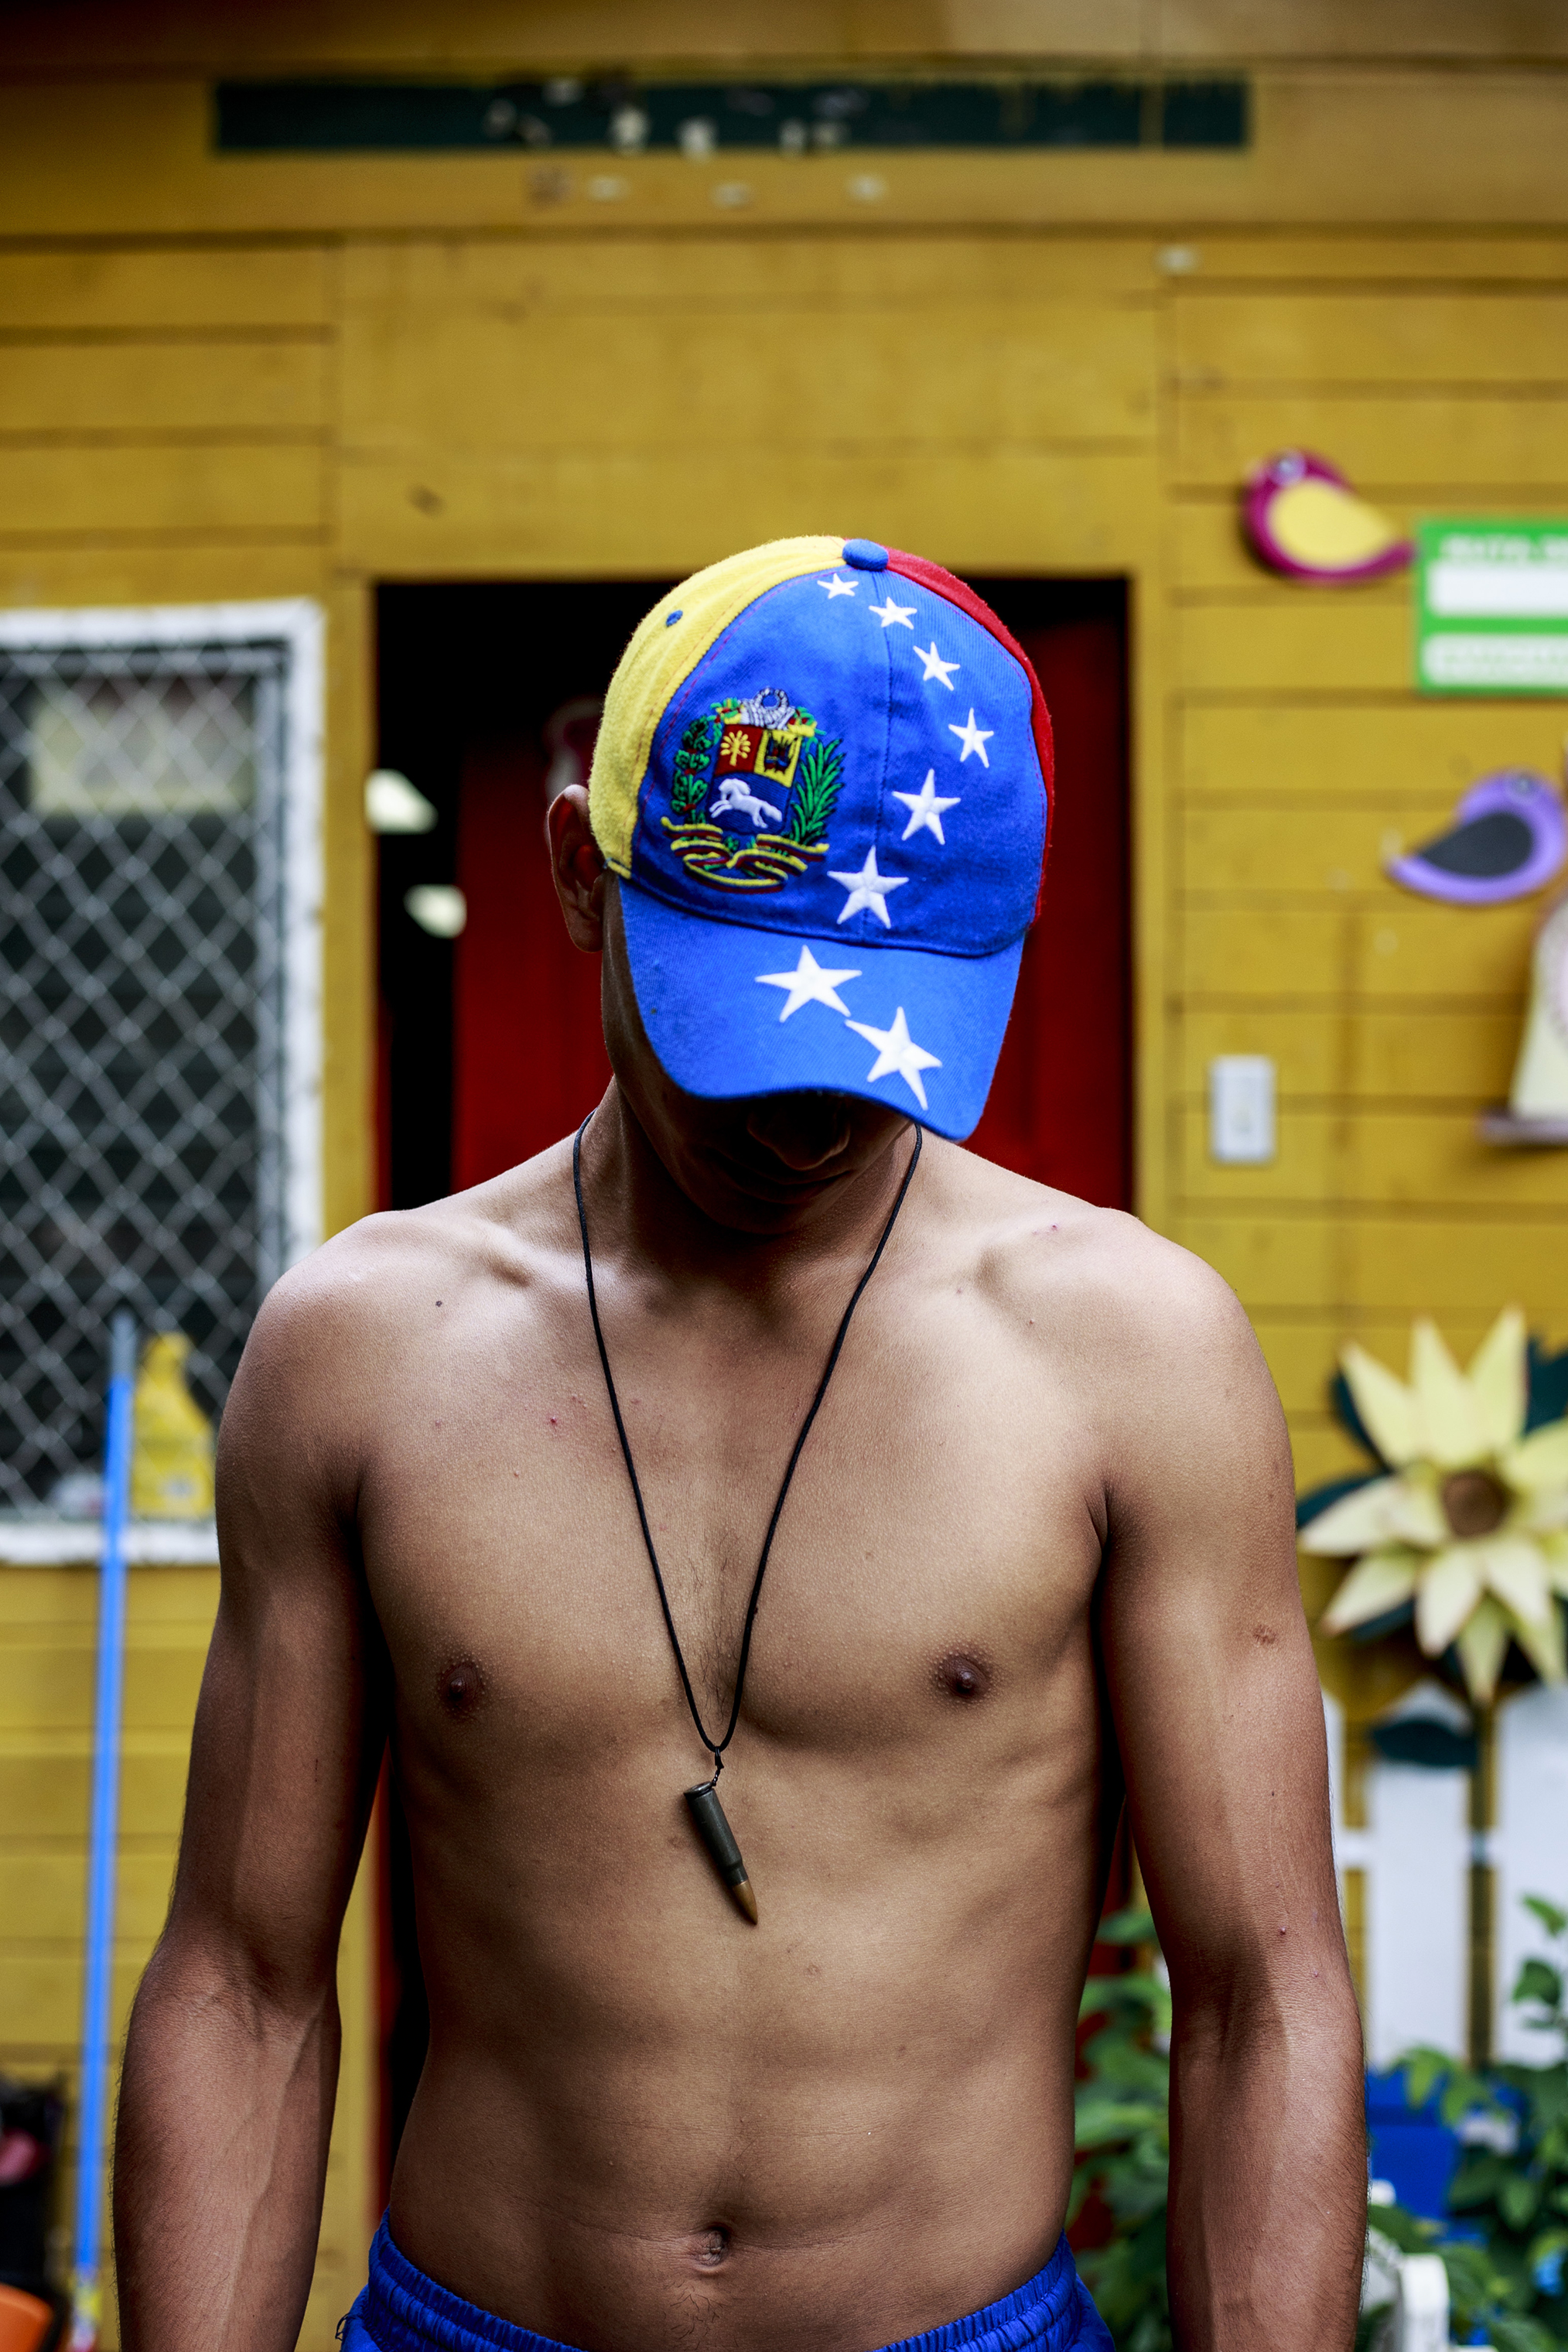 A Venezuelan man participating in the various anti-government protests in Managua on June 27. An AK-47 bullet hangs from his neck. (Fred Ramos—El Faro)